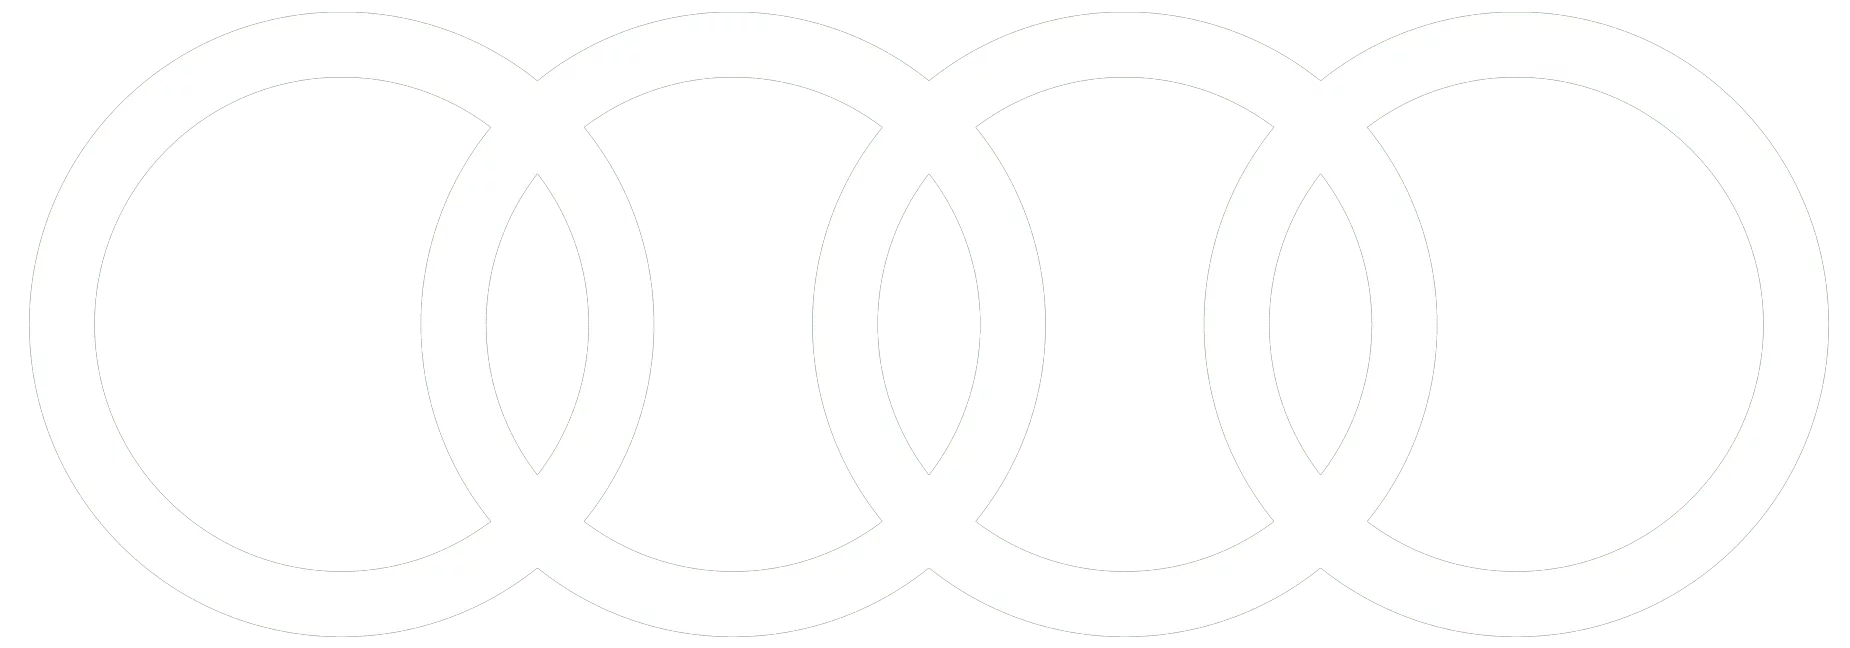 Four interlocking white circles on a black background, creating a chain-link design.